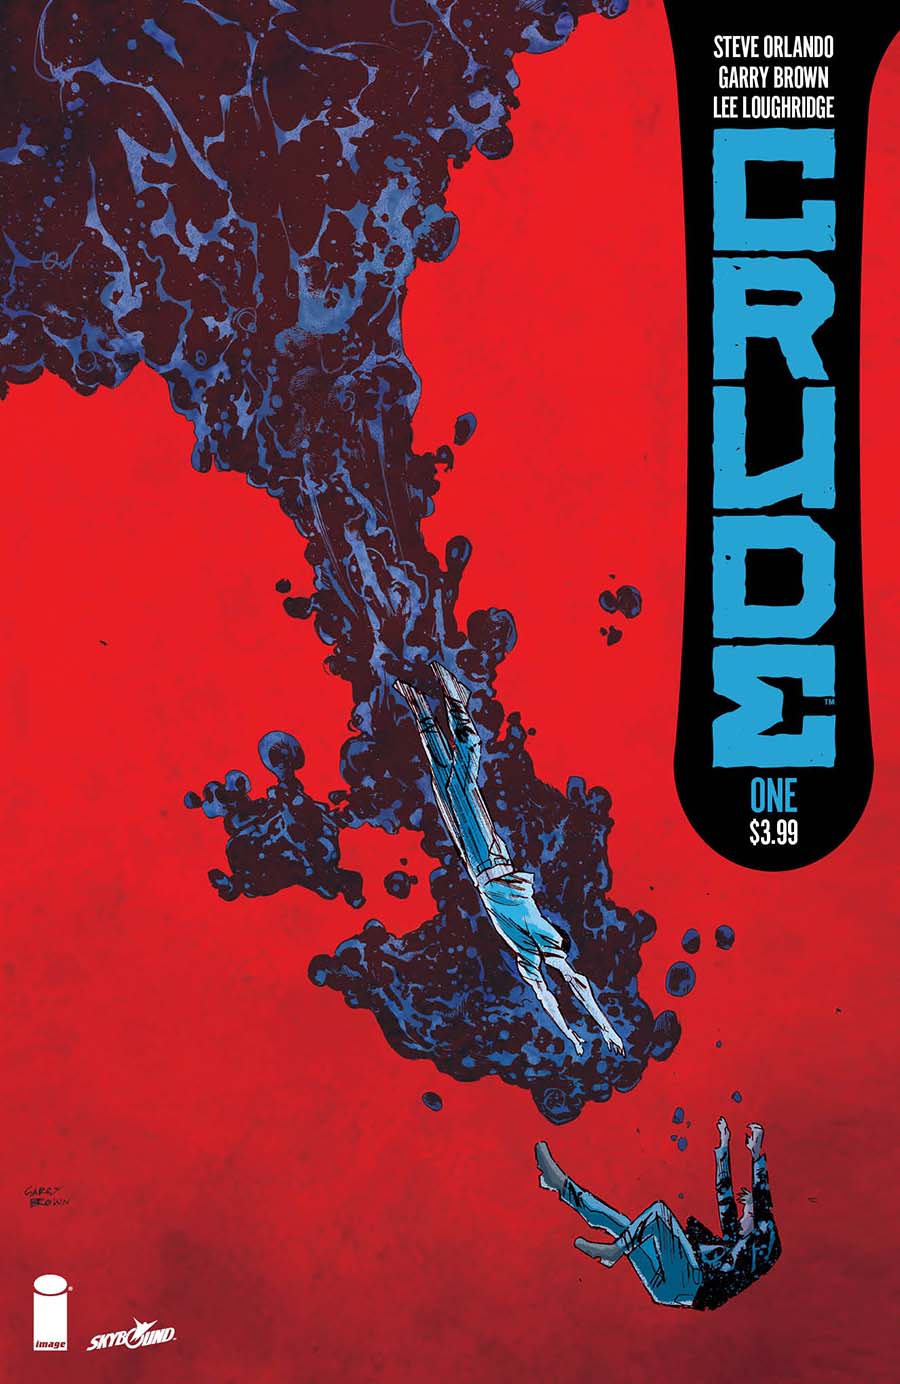 Crude #1 spoiler-free advance review: Off to a good start